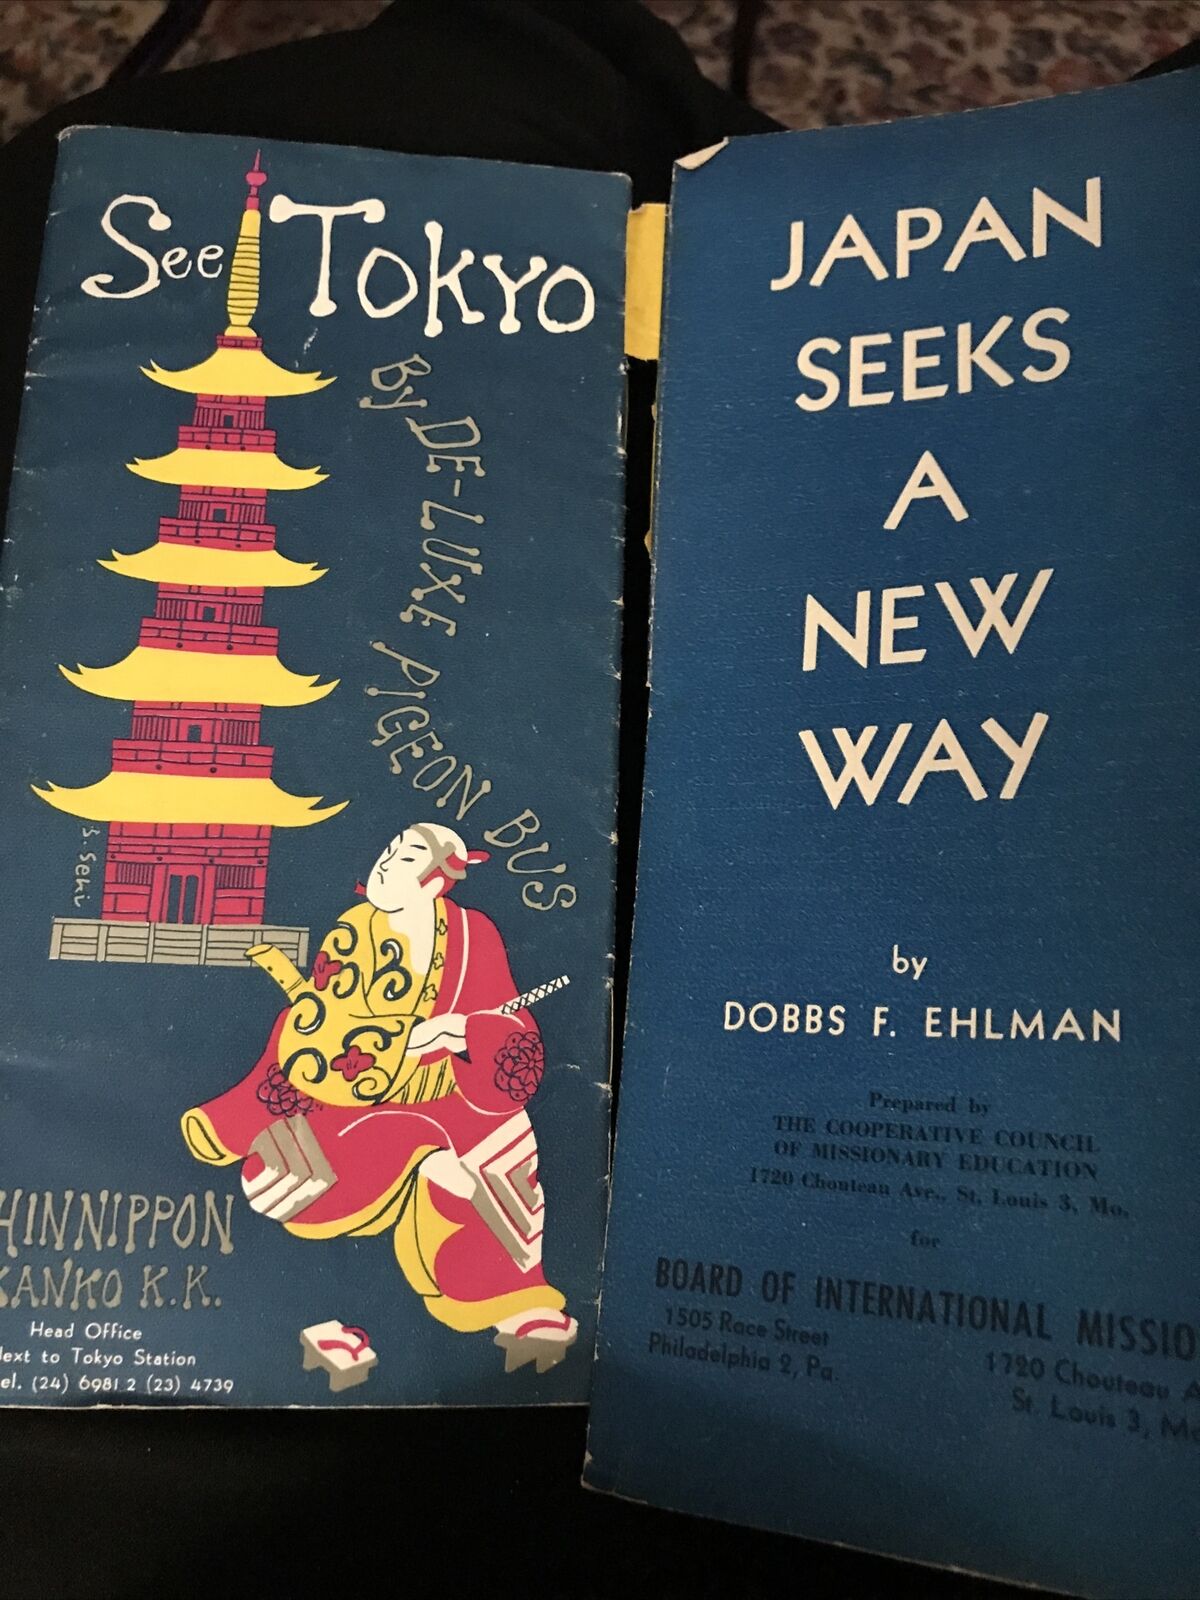 Vintage Pamphlets See Tokyo By De-Luxe Pigeon Bus 1954 with Maps Japan Seeks New